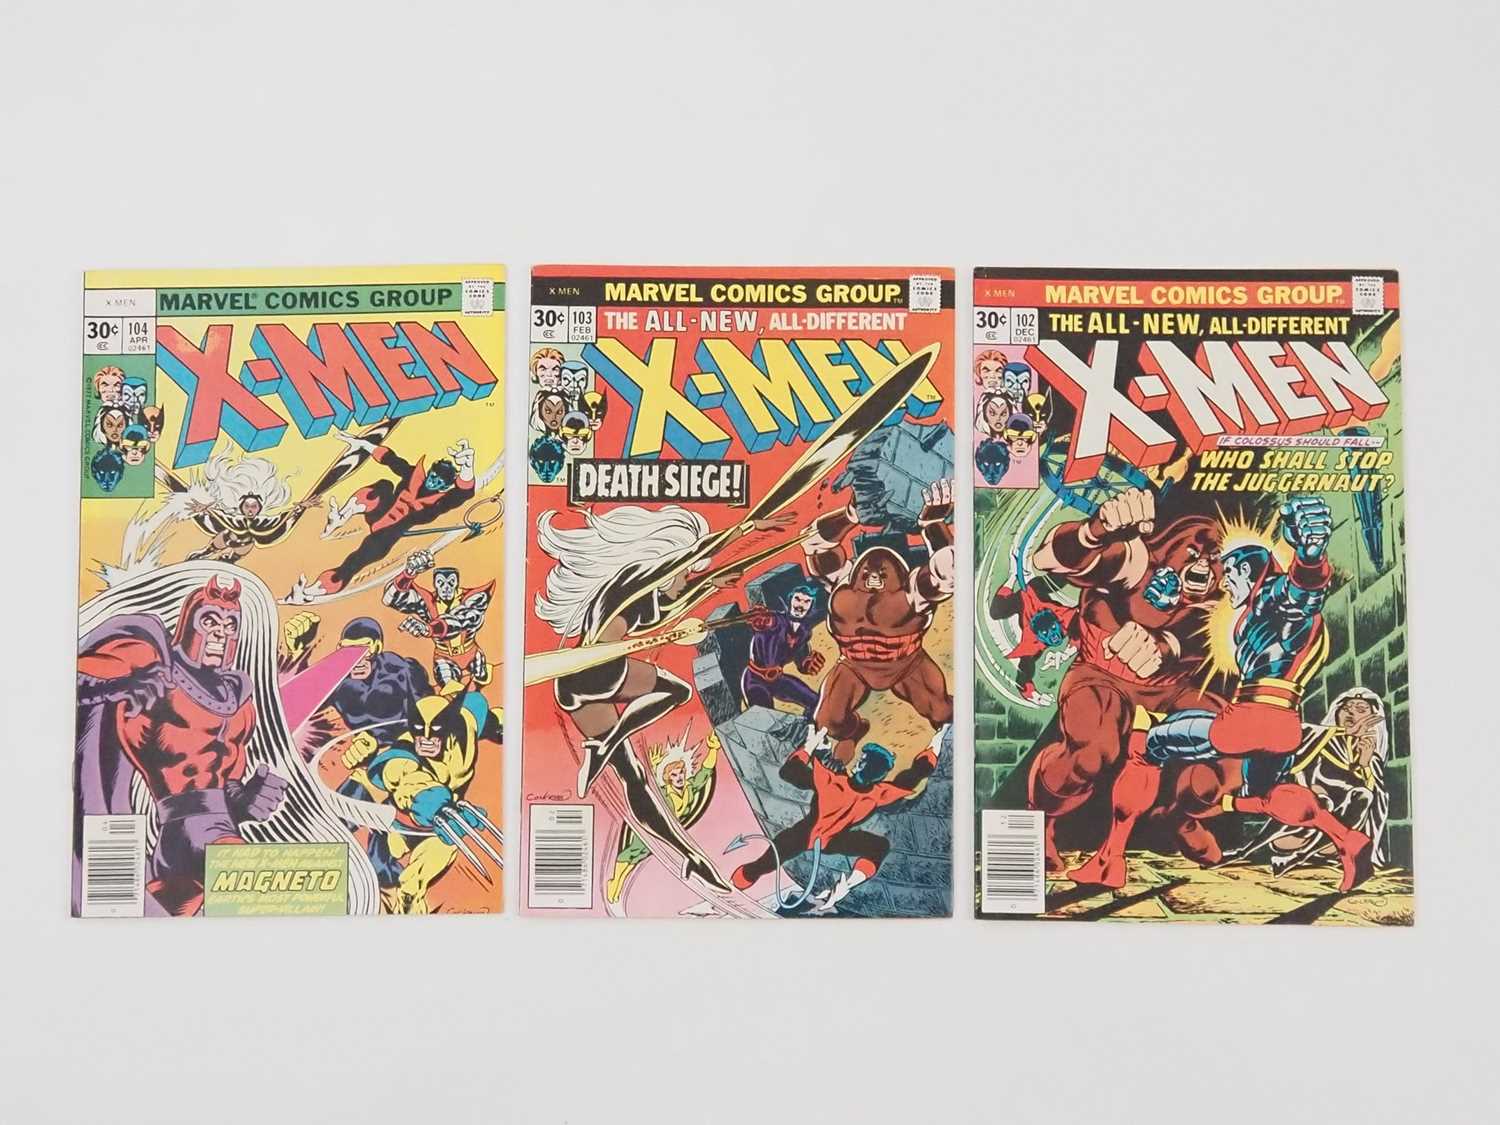 X-MEN #102, 103, 104 (3 in Lot) - (1976/1977 - MARVEL) - Includes the first battle between the